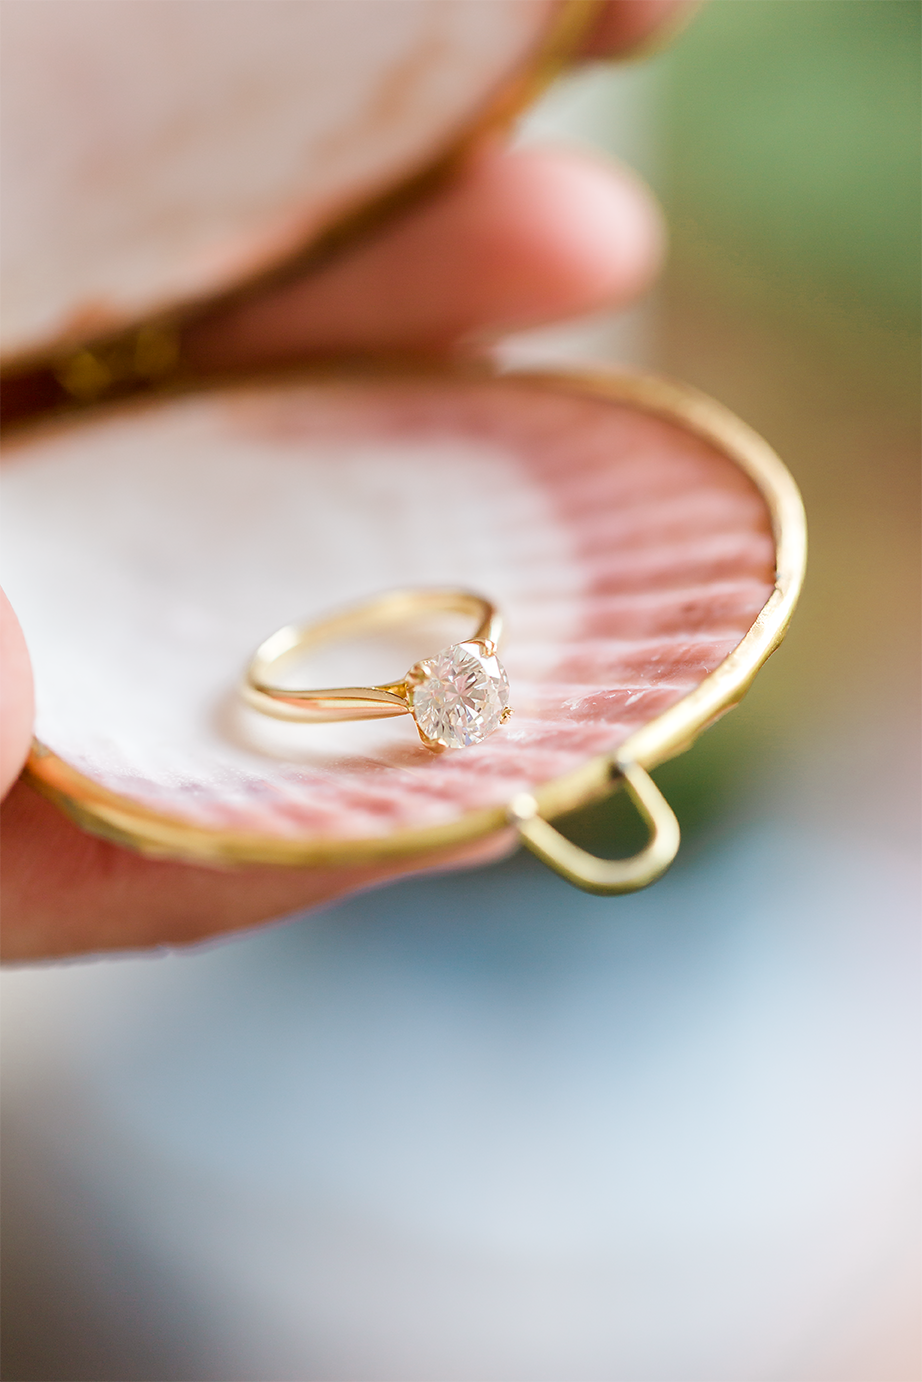 ring in a seashell for the proposal